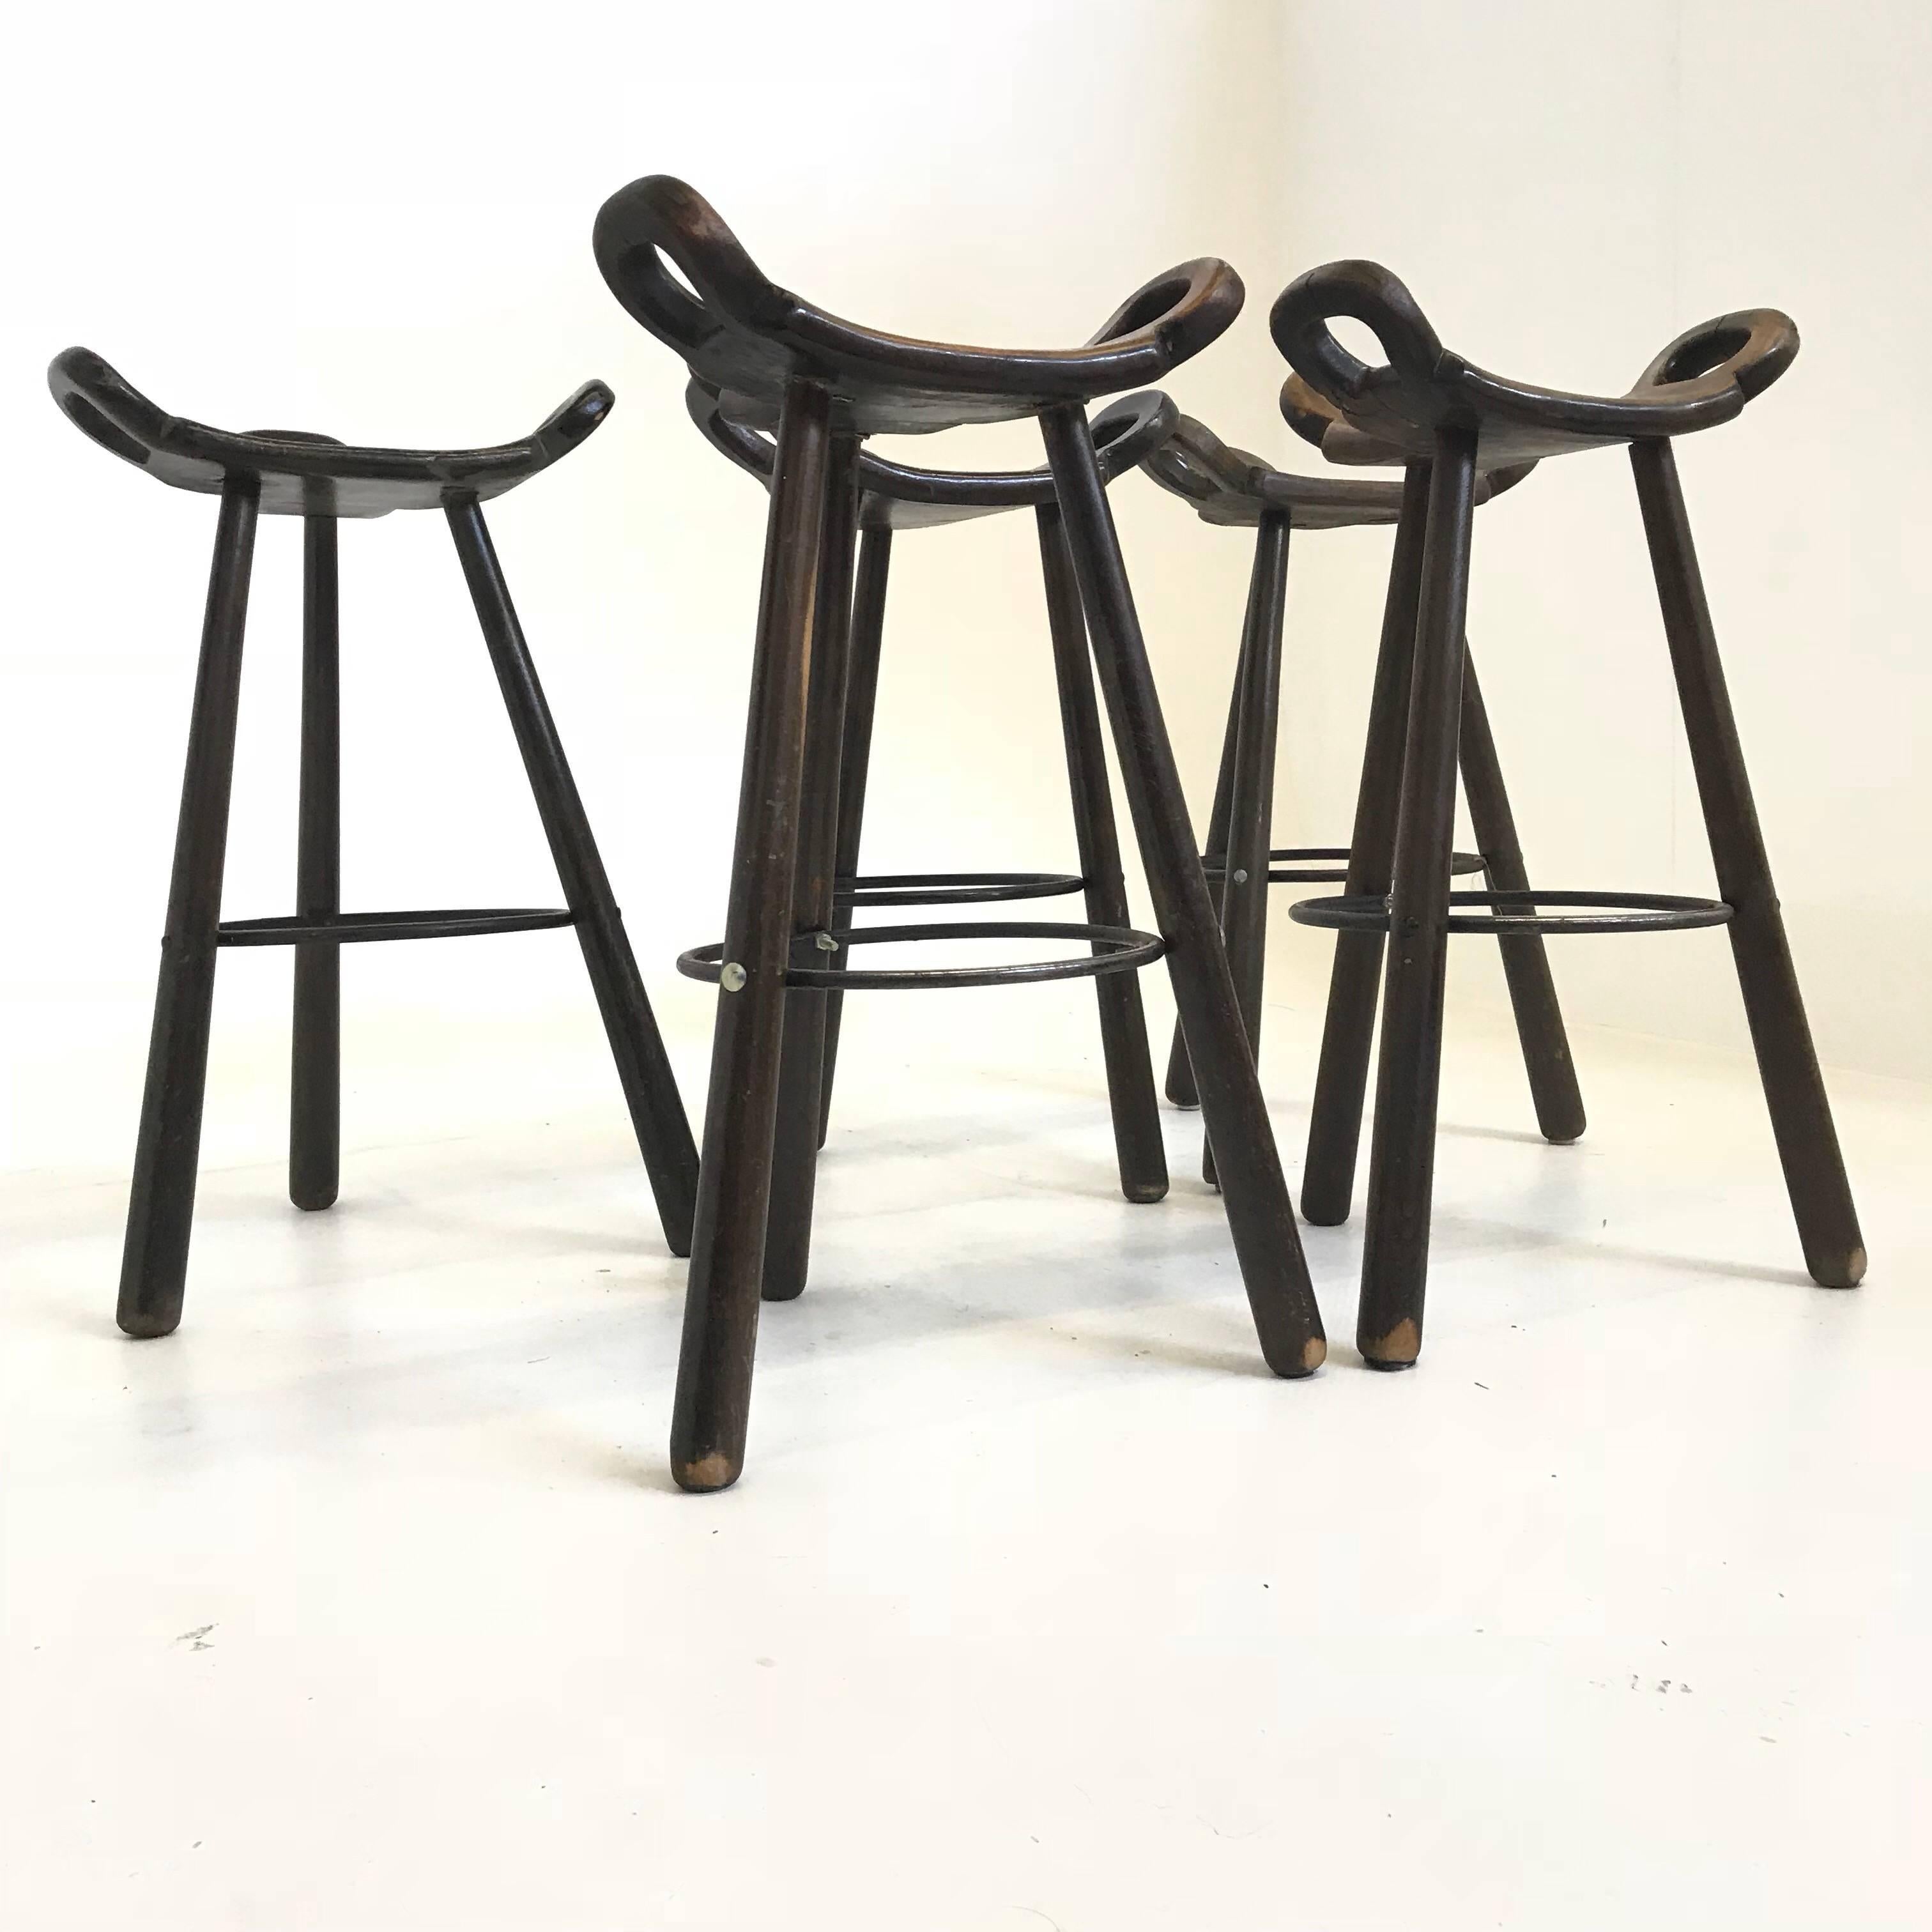 Late 20th Century Brutalist Barstool Spanish Chair Marbella Set of Five For Sale